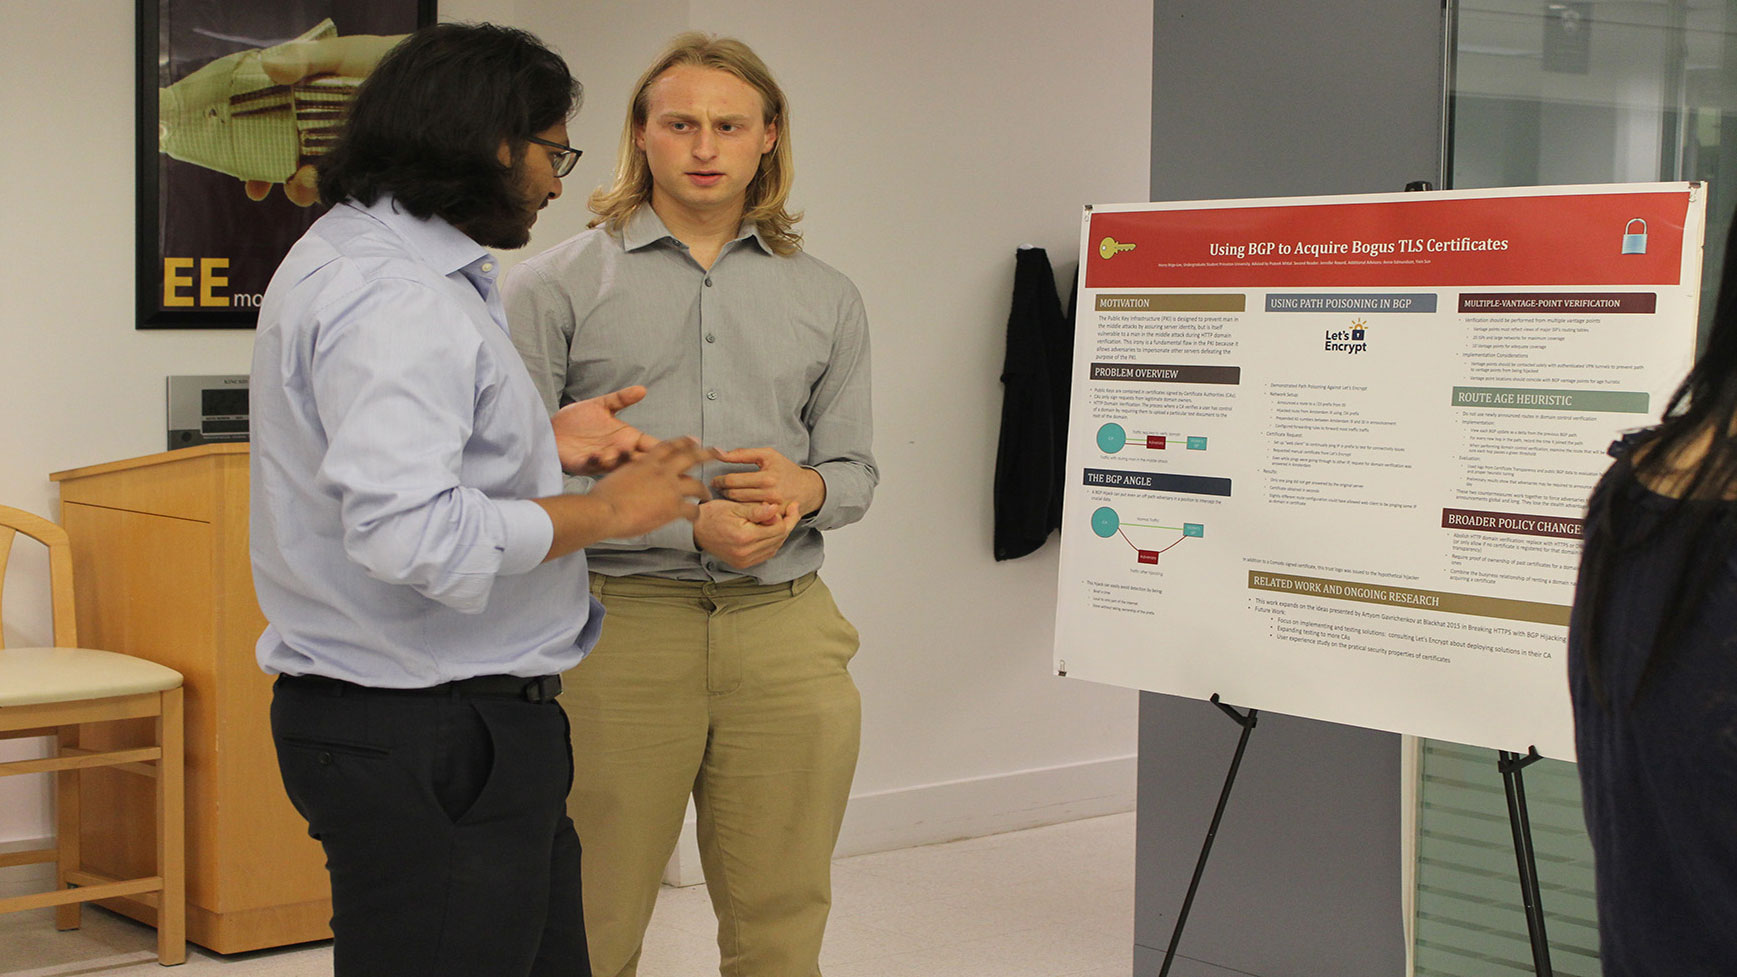 Faculty member and student speak at poster presentation